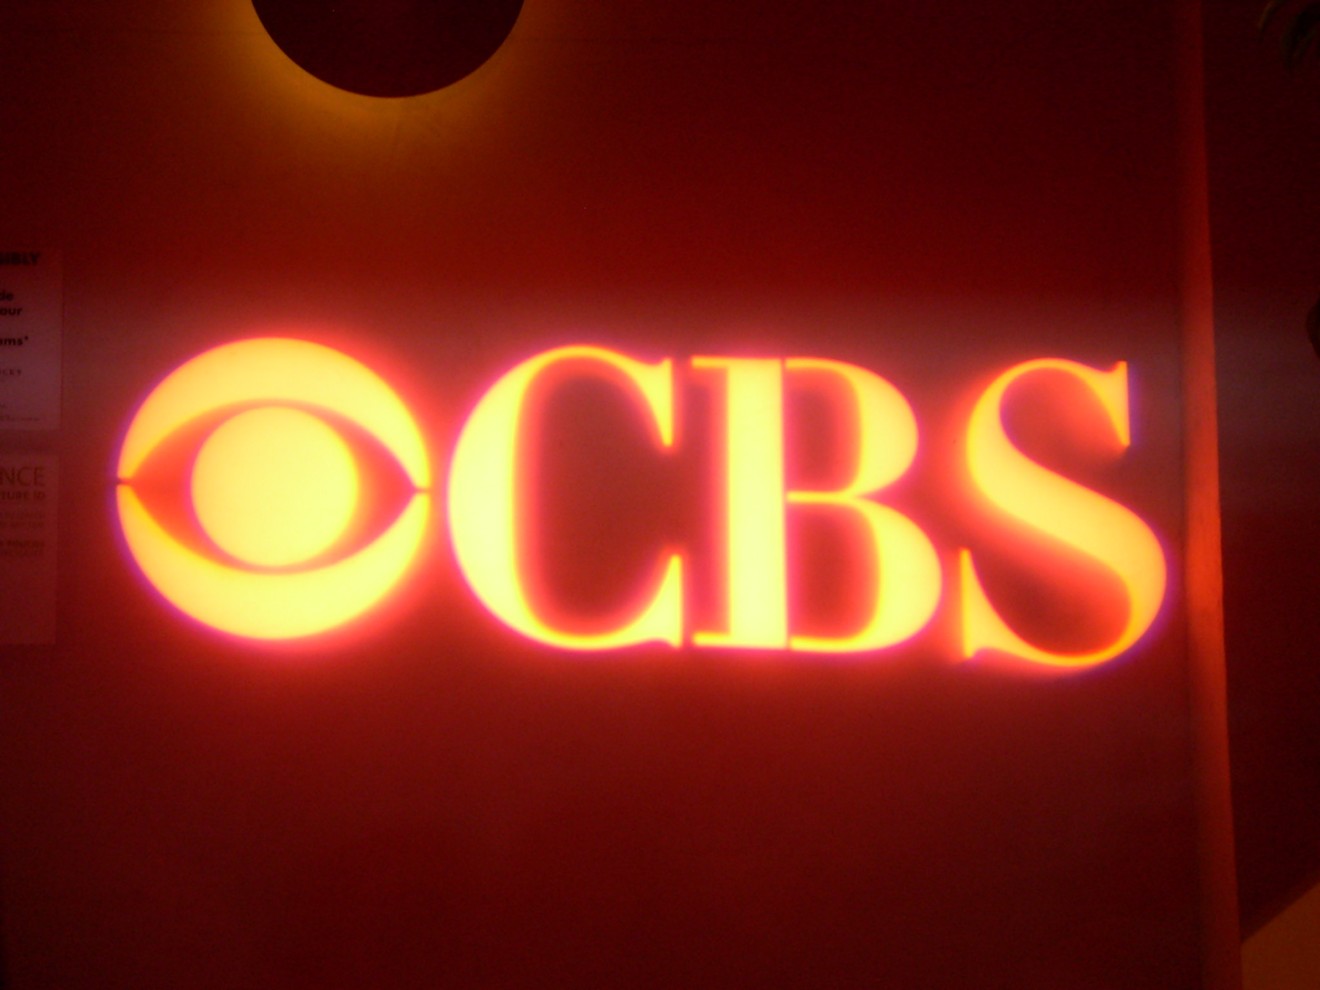 CBS denies WFOR anchor Michele Gillen was discriminated against based on age or sex.